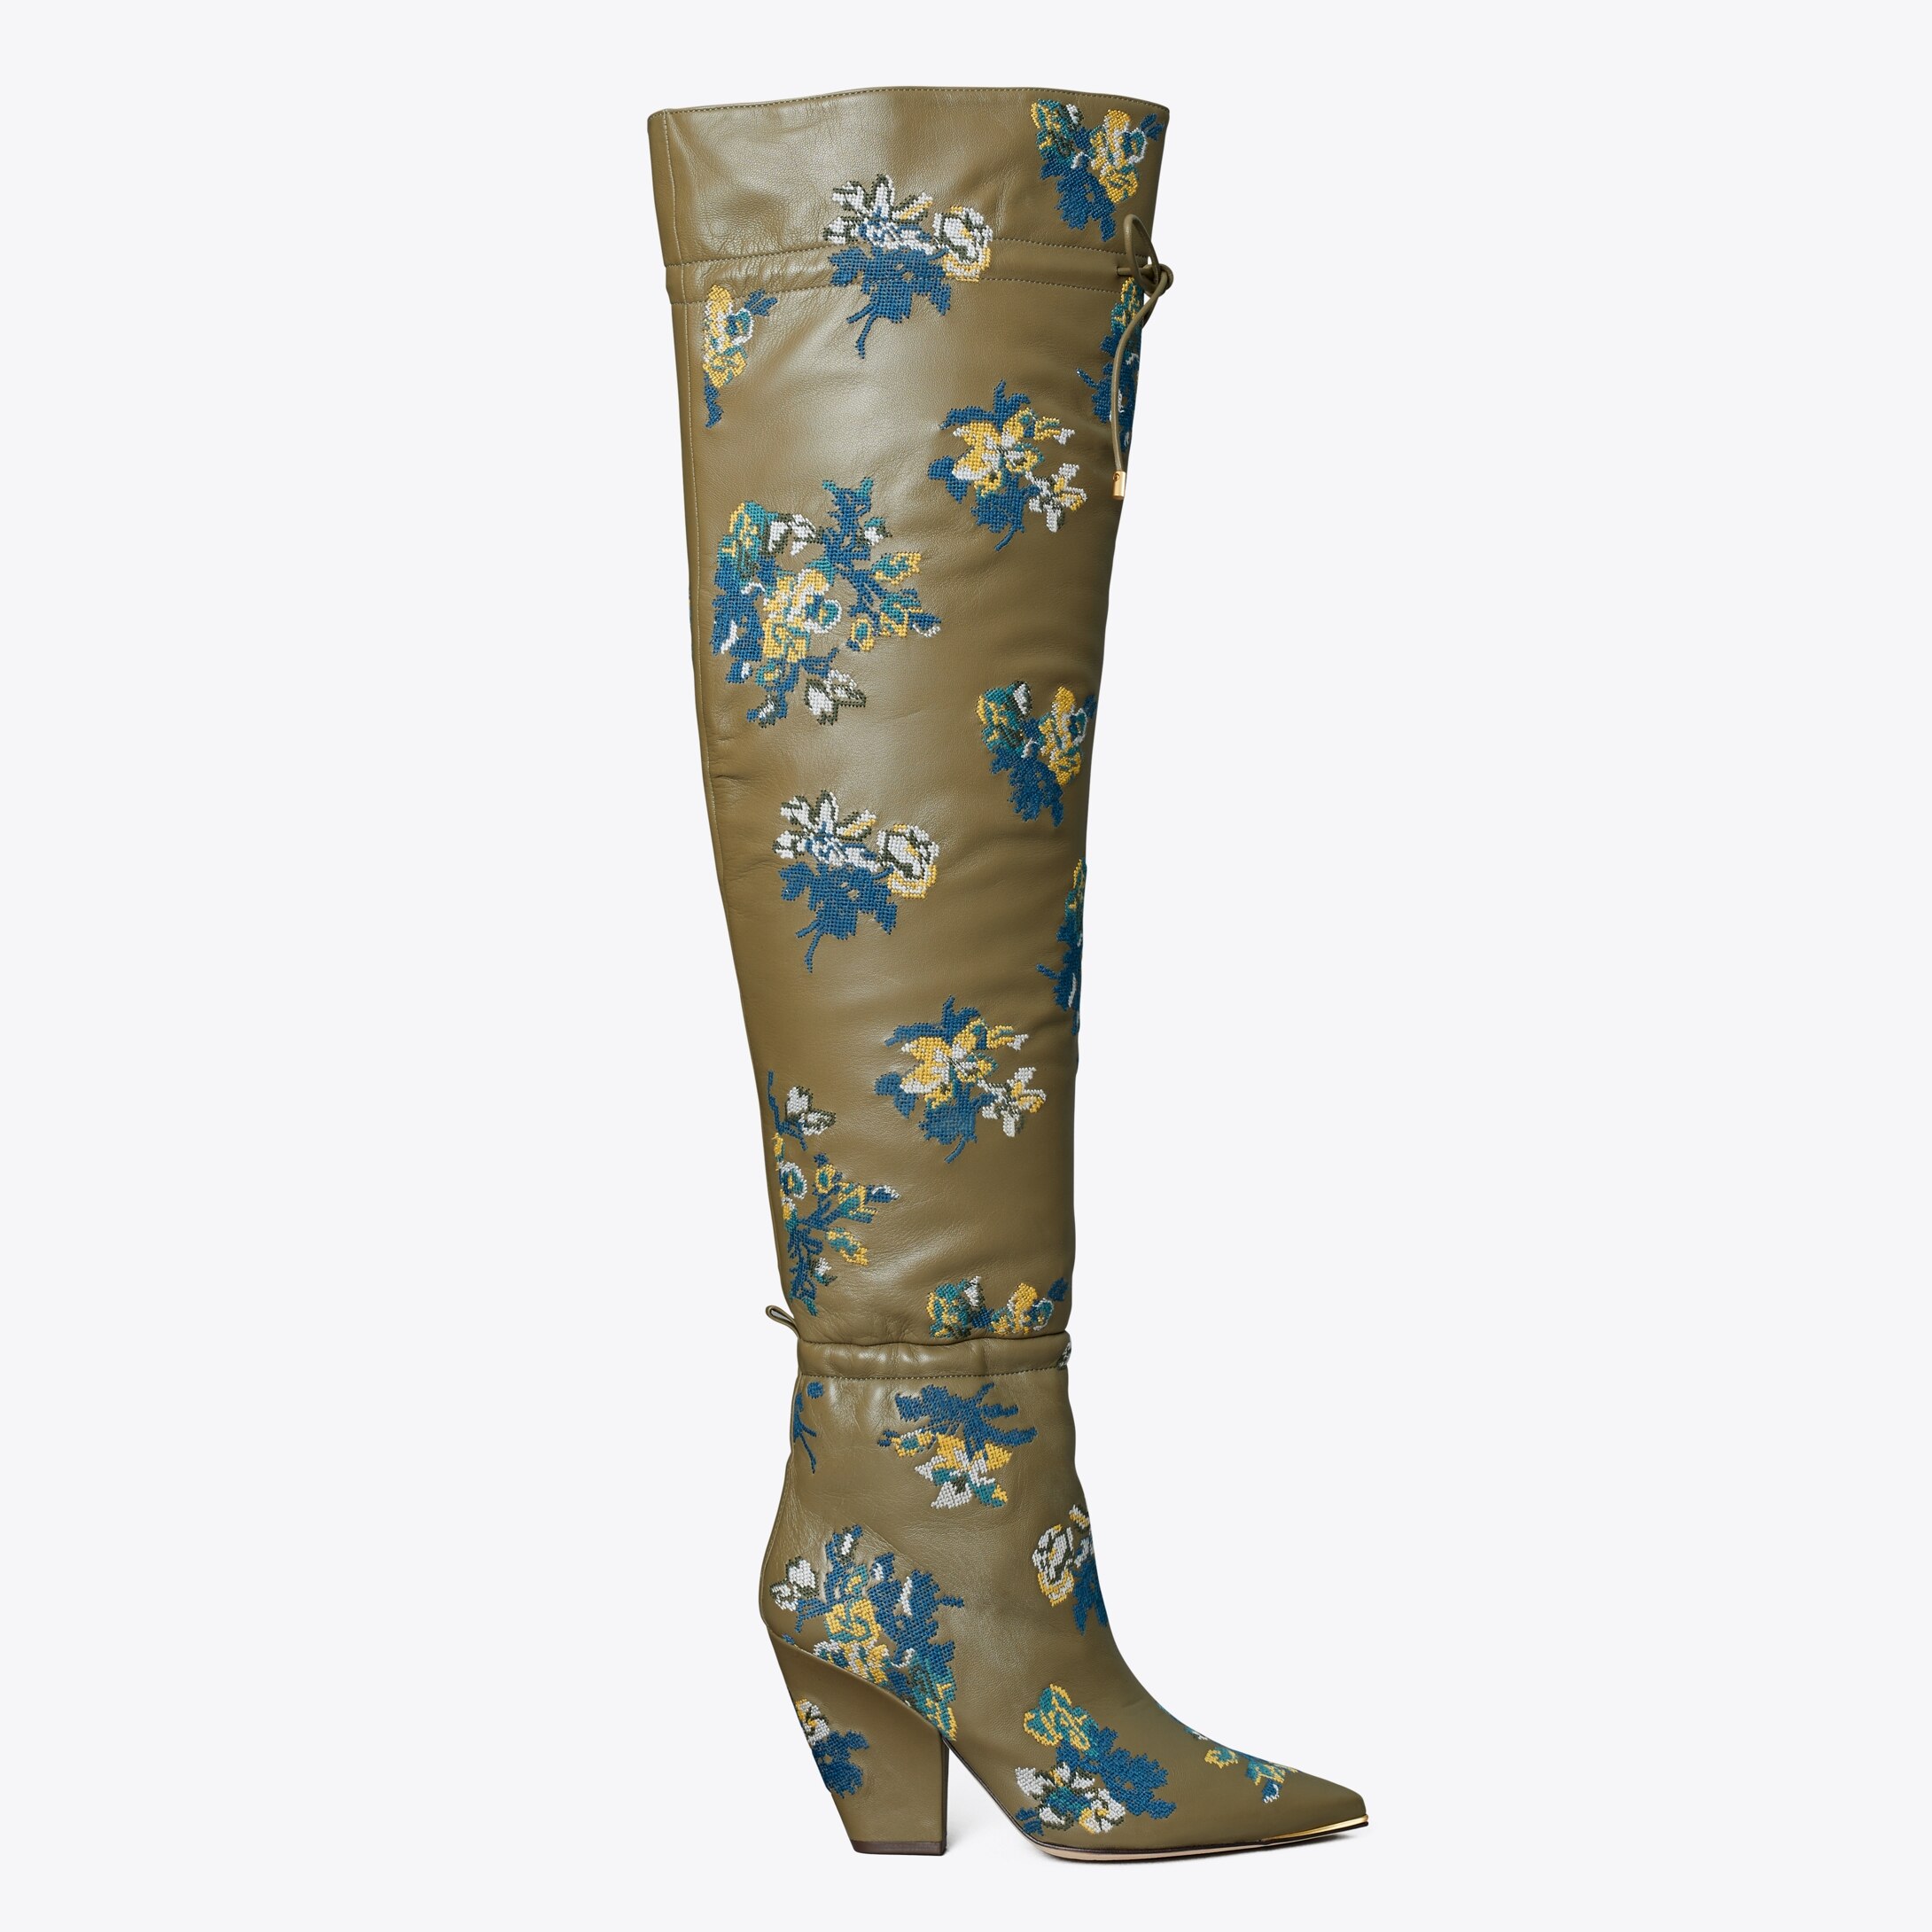 Tory Burch Lila Embroidered Over-The-Knee Scrunch Boot - Big Apple Buddy